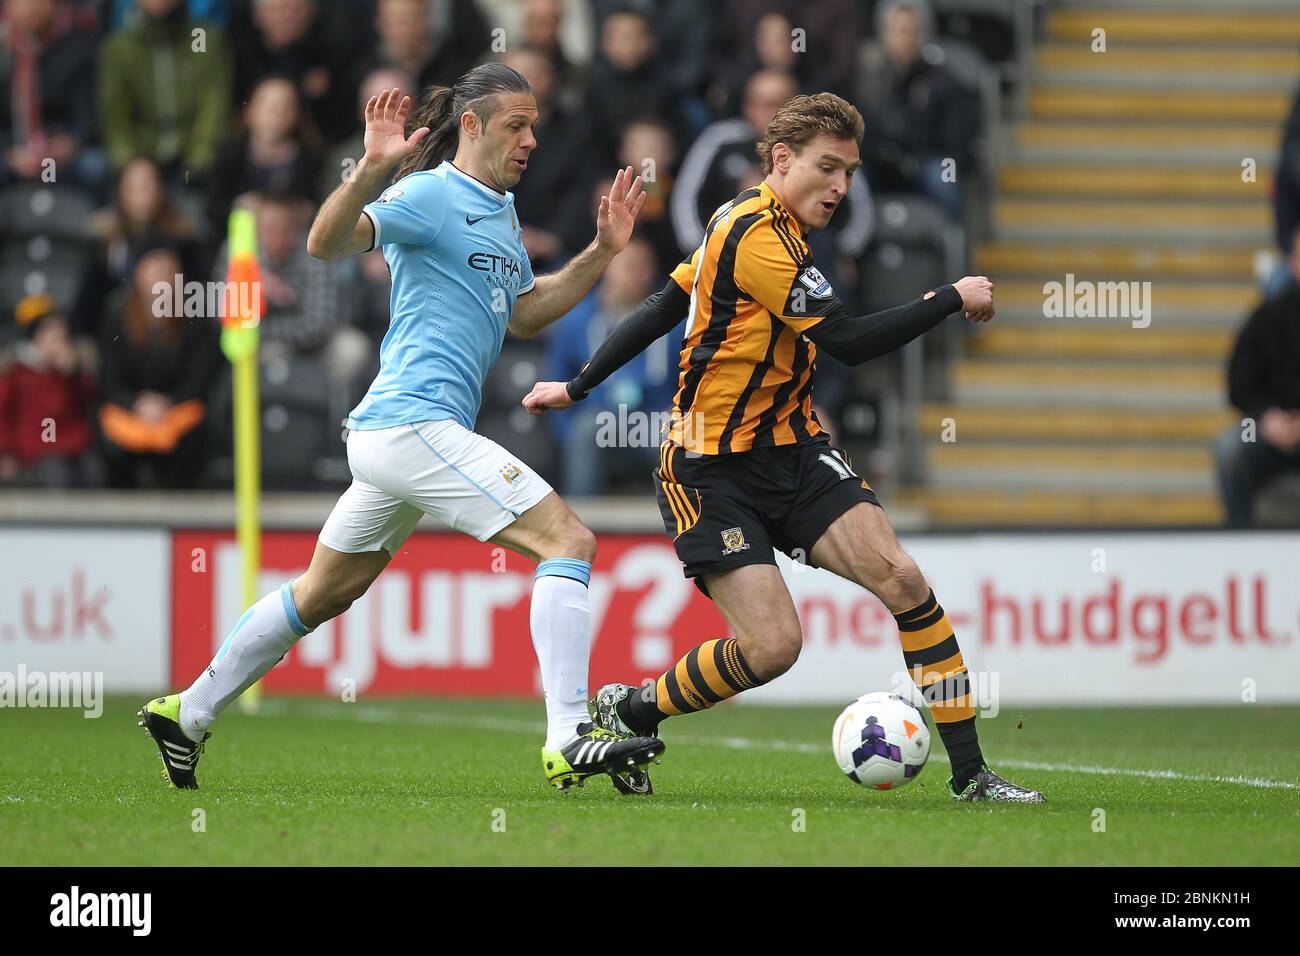 KINGSTON UPON HULL, ENGLAND - Nico Jelavic of Hull City and Martin Demichelis of Manchester City during the Premier League match between Hull City and Manchester City at the KC Stadium, Kingston upon Hull on Saturday 15th March 2014 (Credit: Mark Fletcher | MI News) Stock Photo